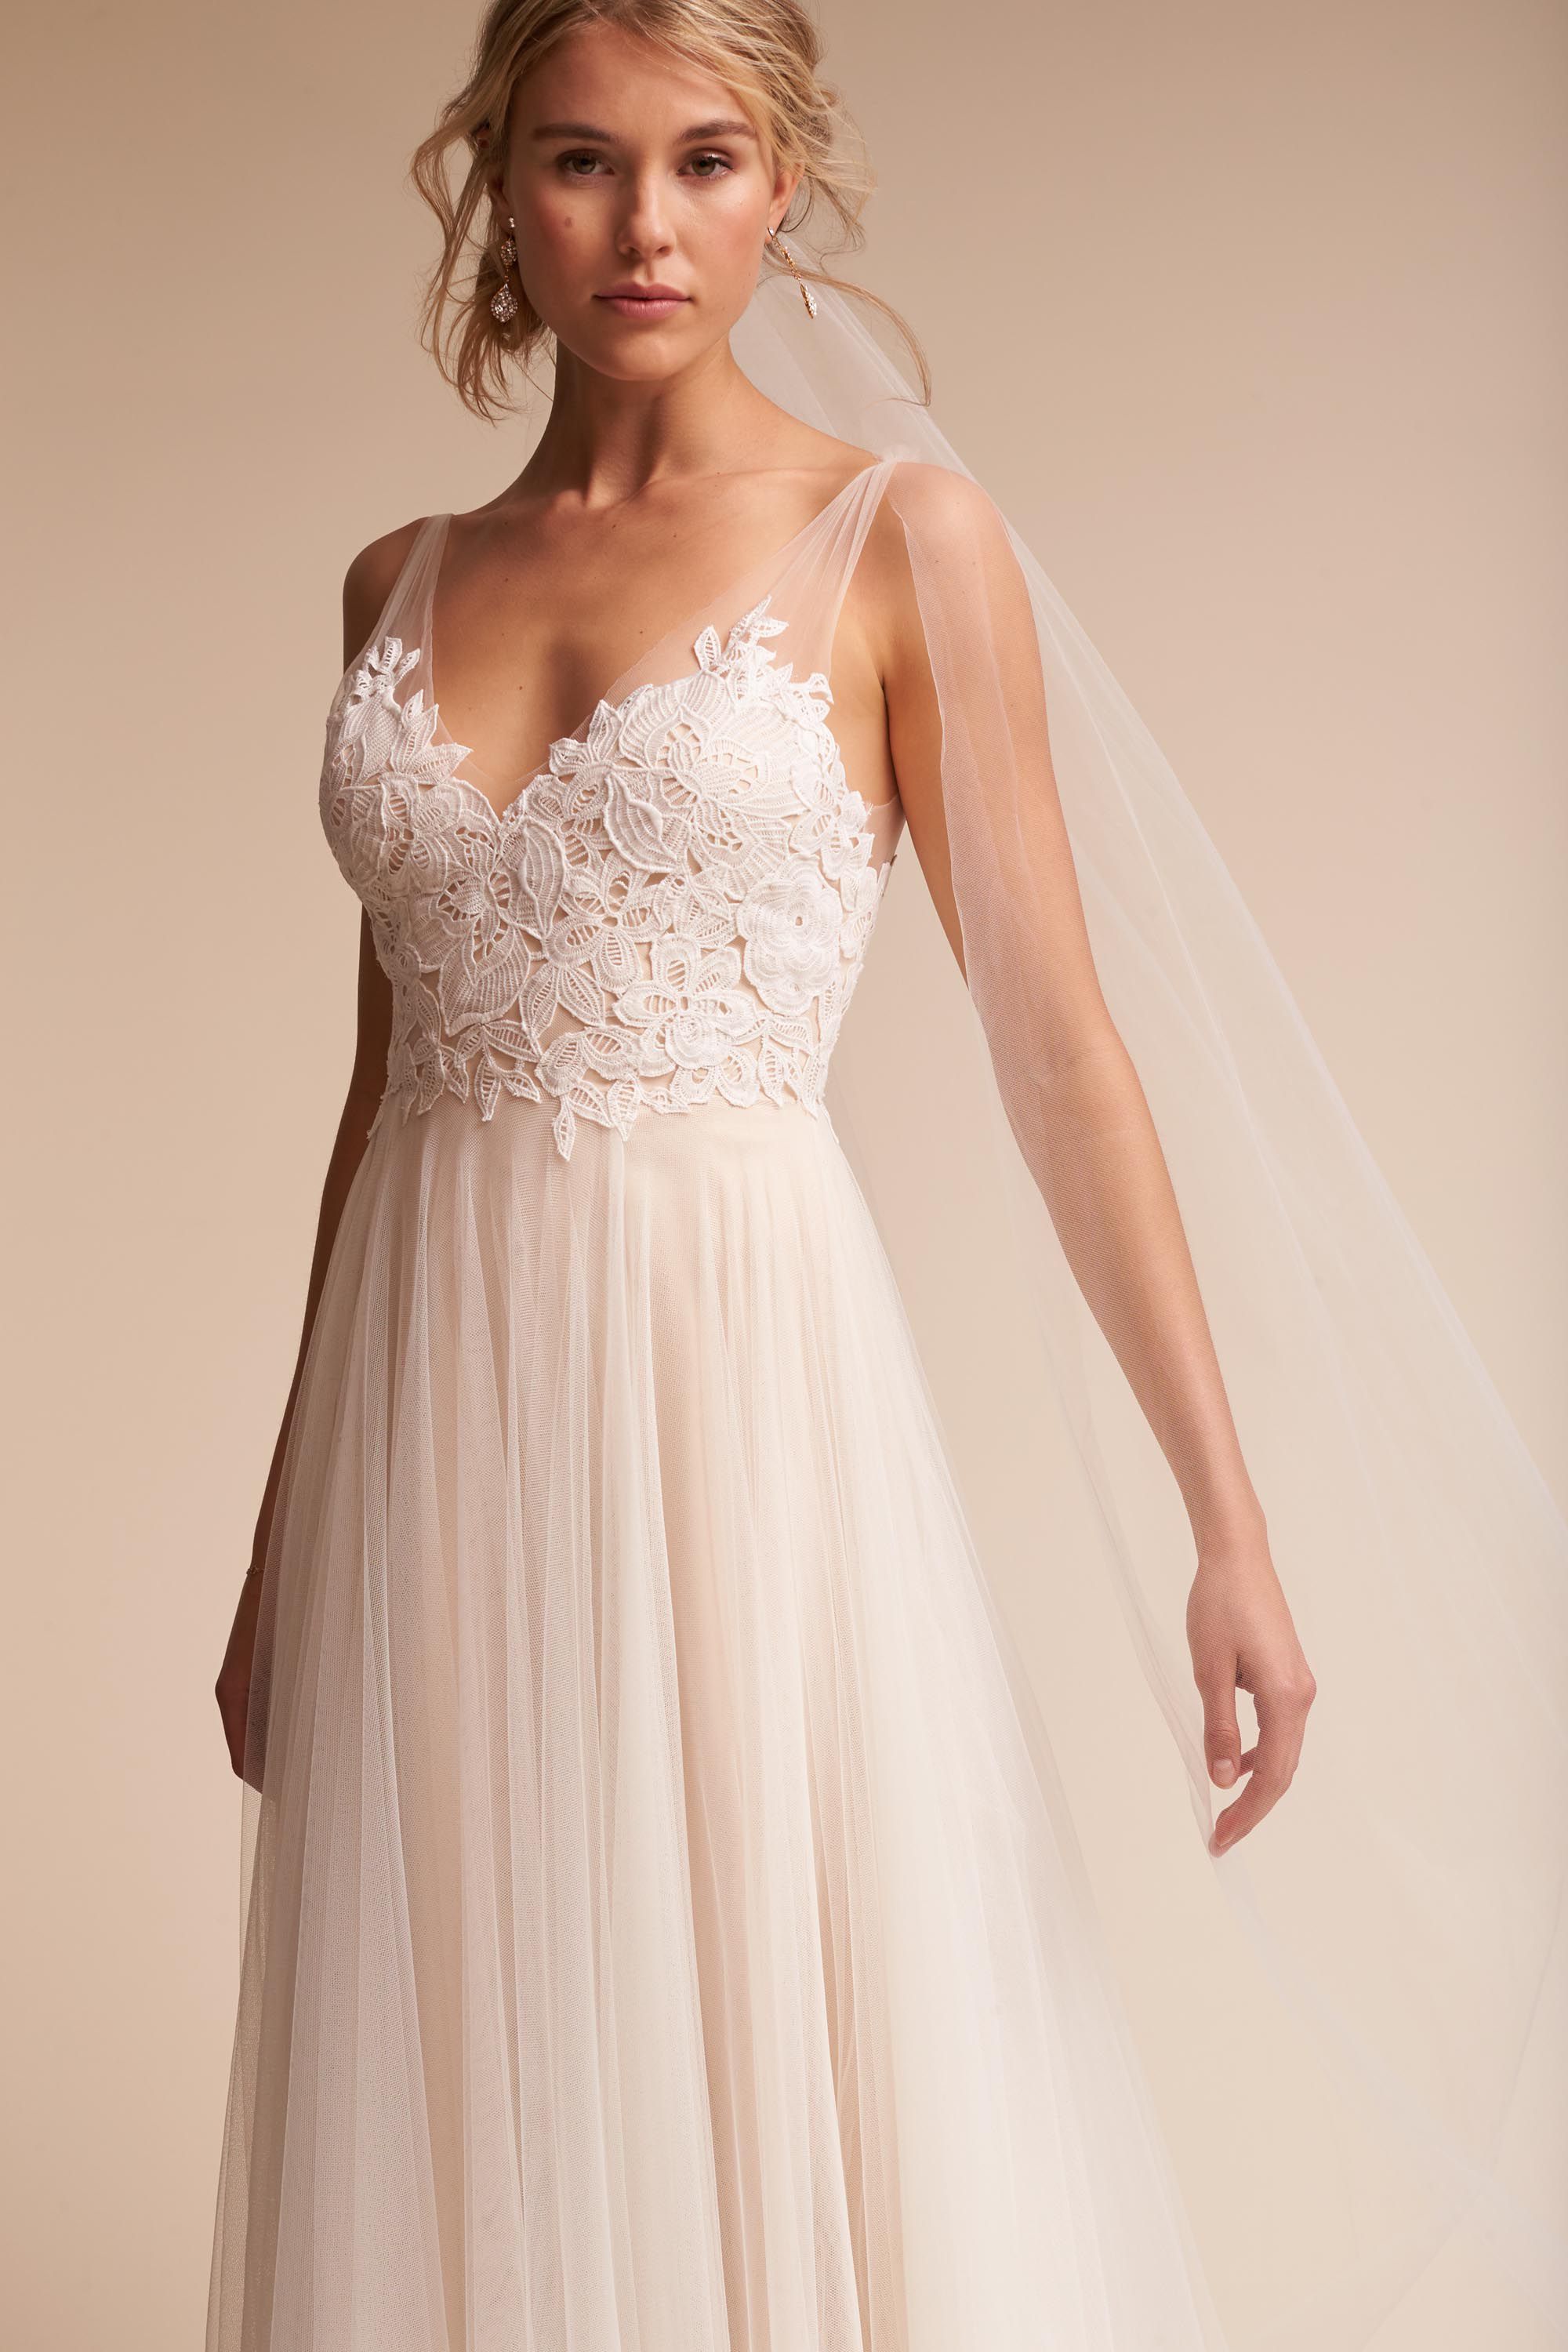 Photo for accessorize simple wedding dress